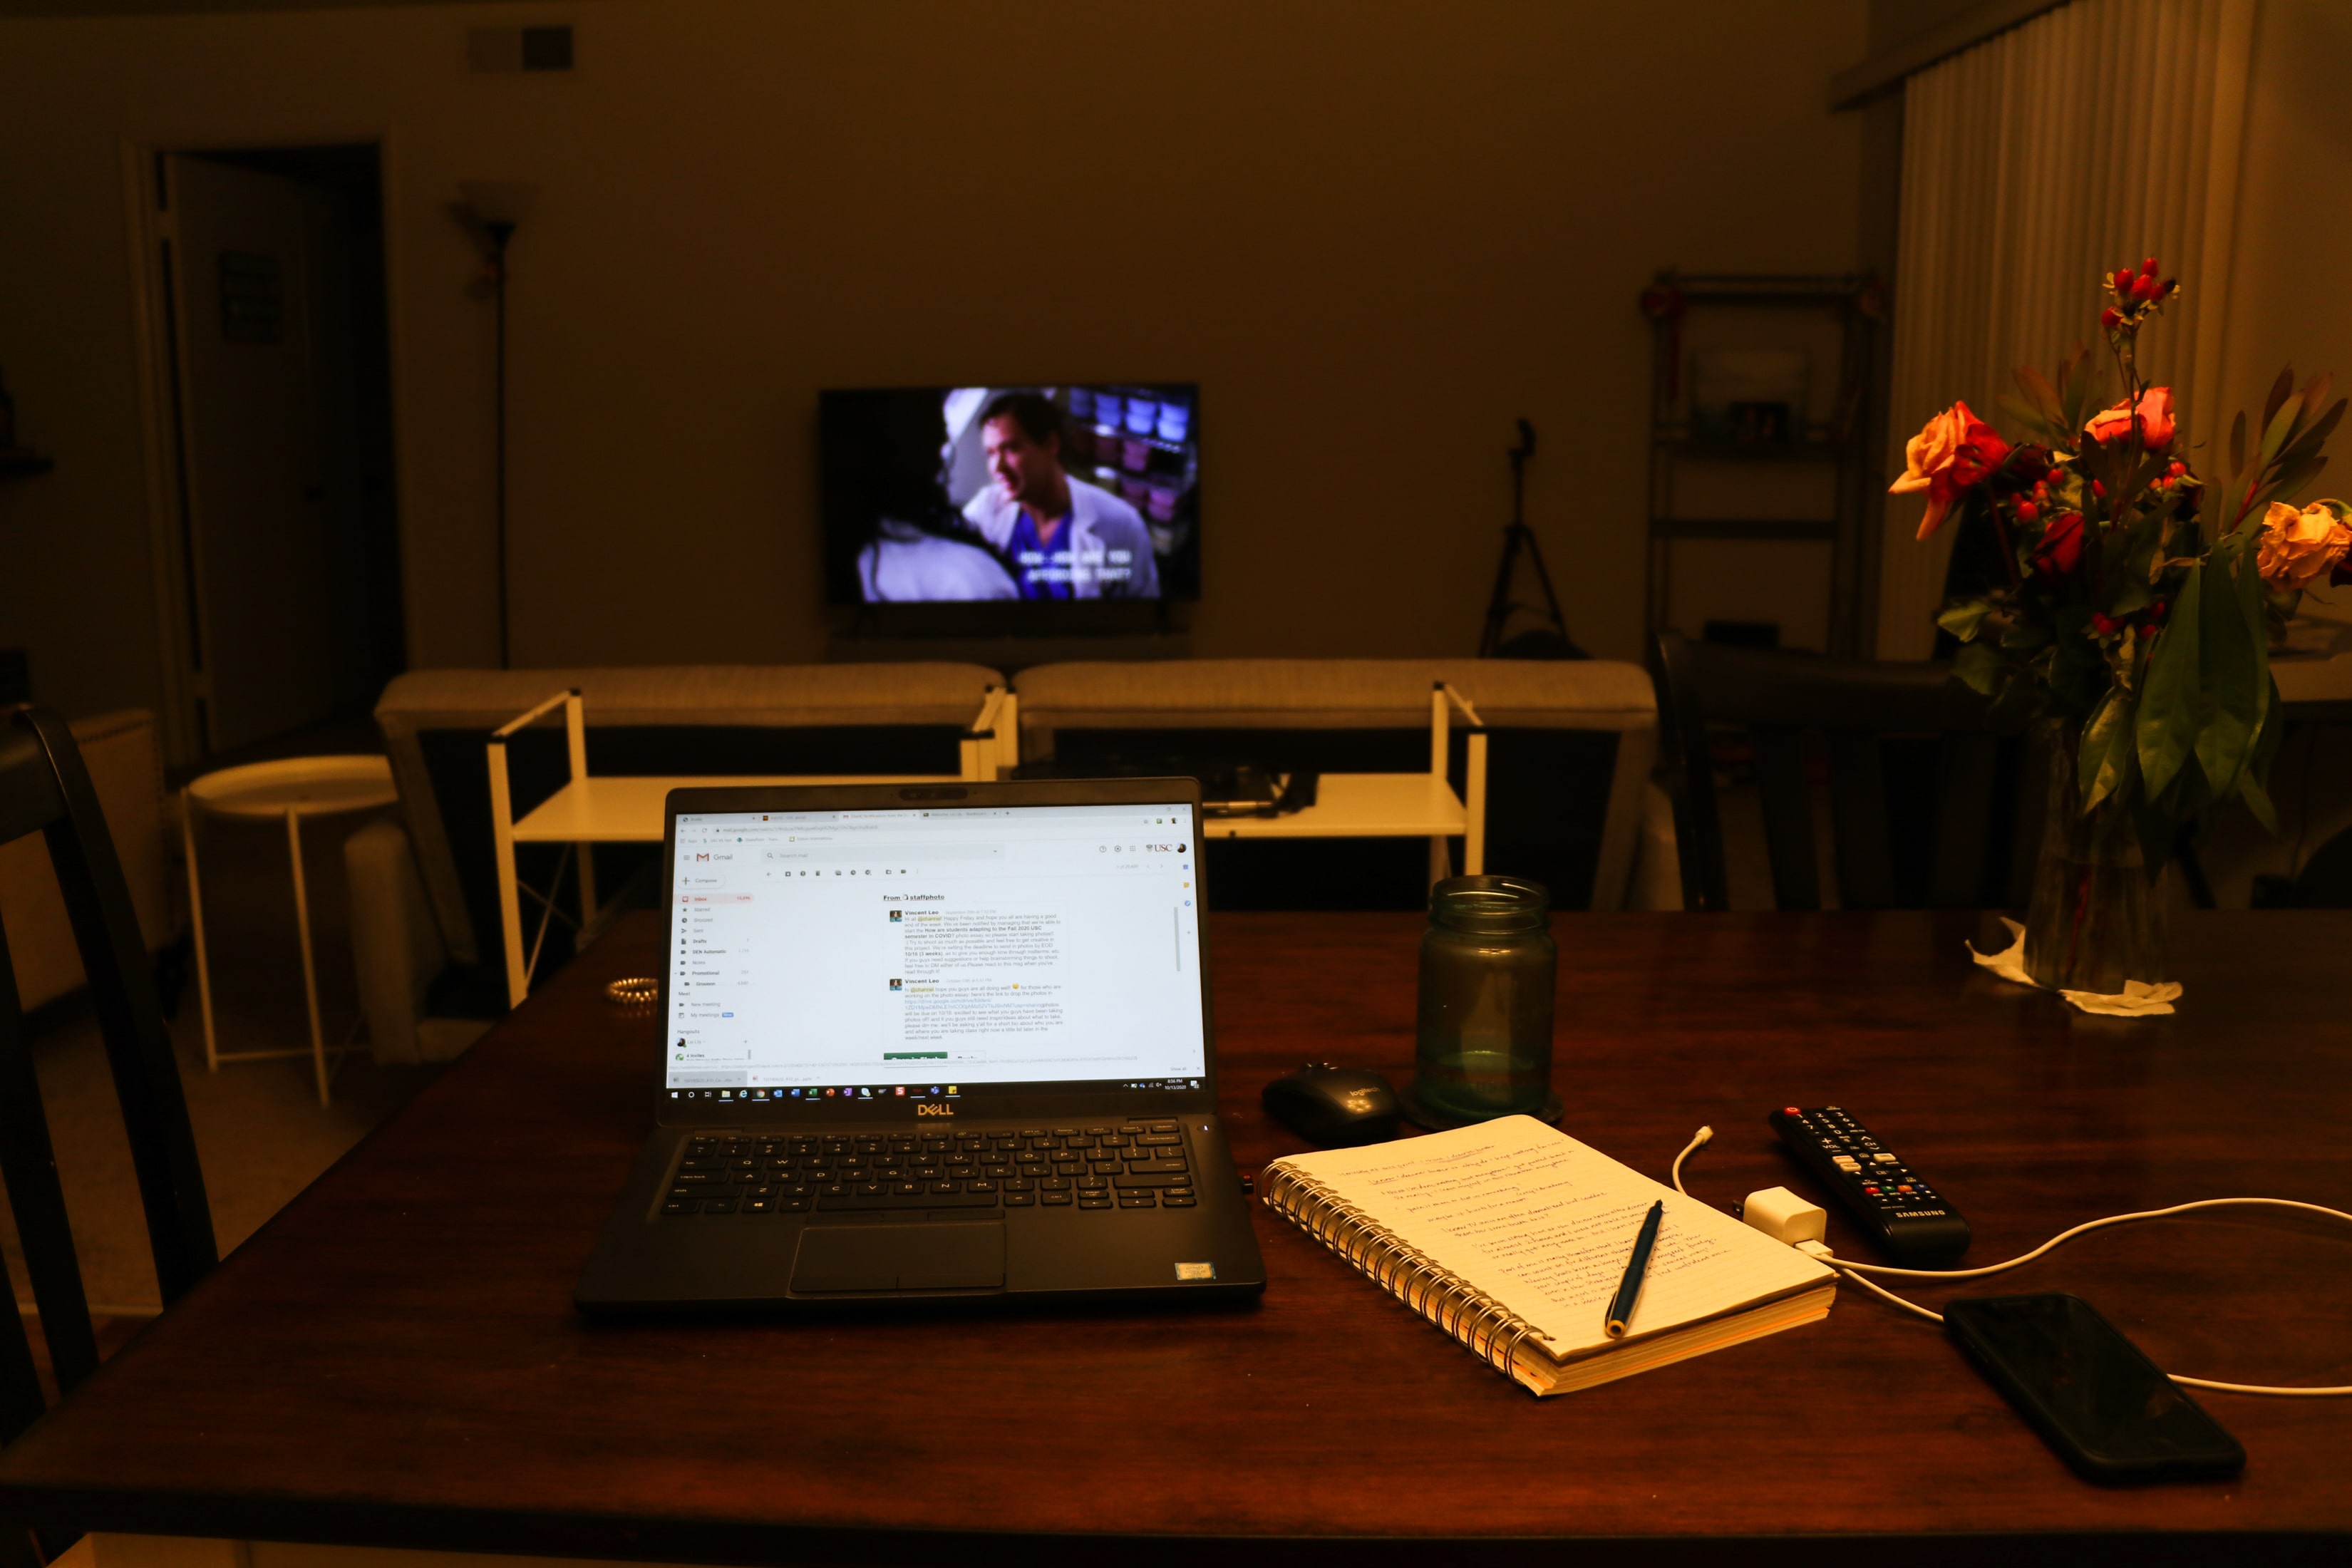 Laptop and notebook on empty table before a TV